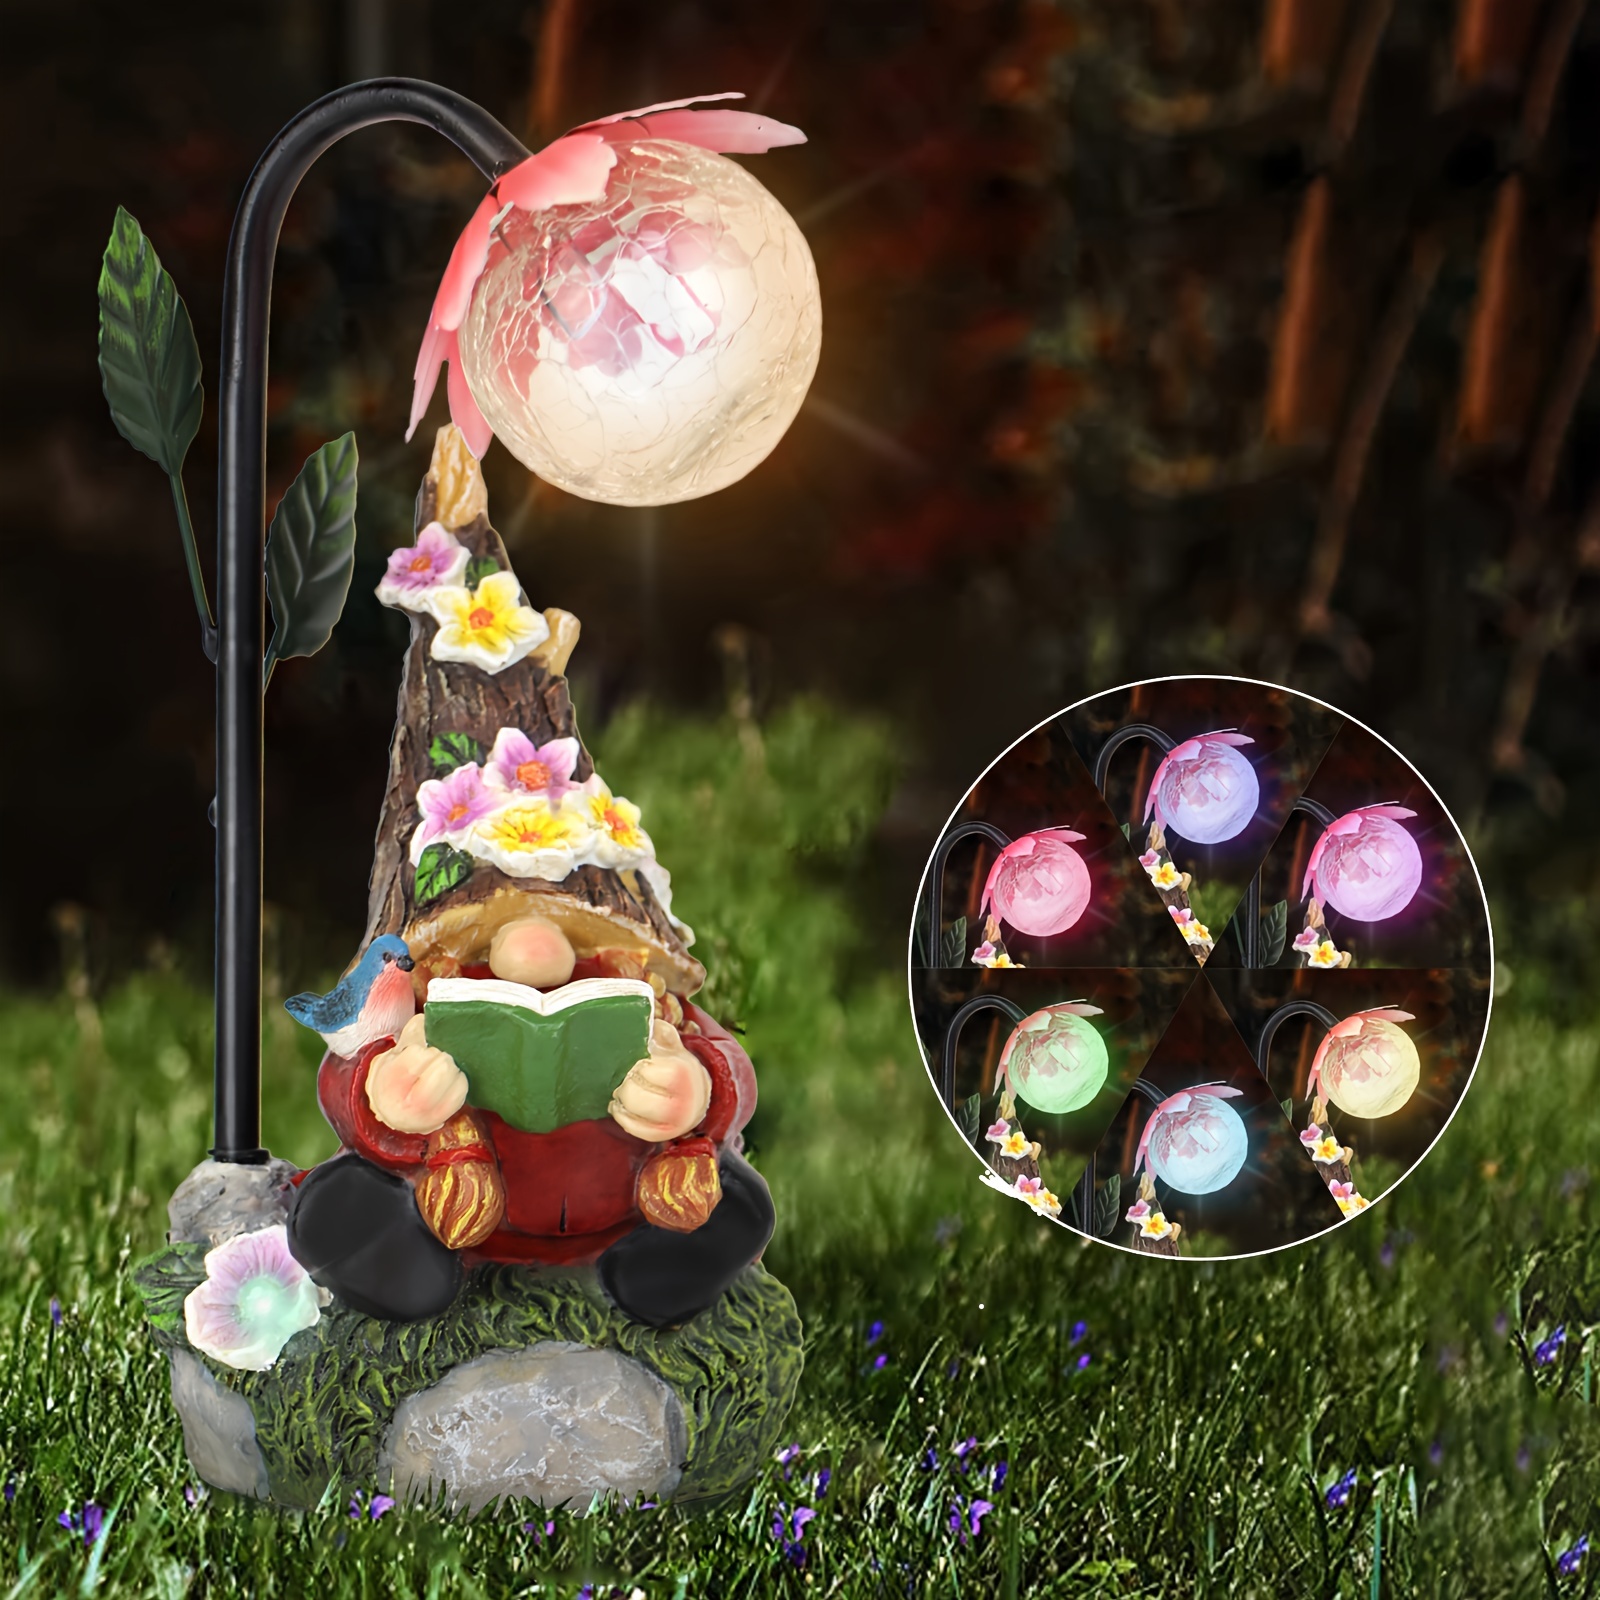 

1pc Garden Gnome Statue With Solar Led Lights, Classic Resin Outdoor Decor, Colorful Gradient Illumination For Patio Balcony Yard, Lawn Ornament Gift